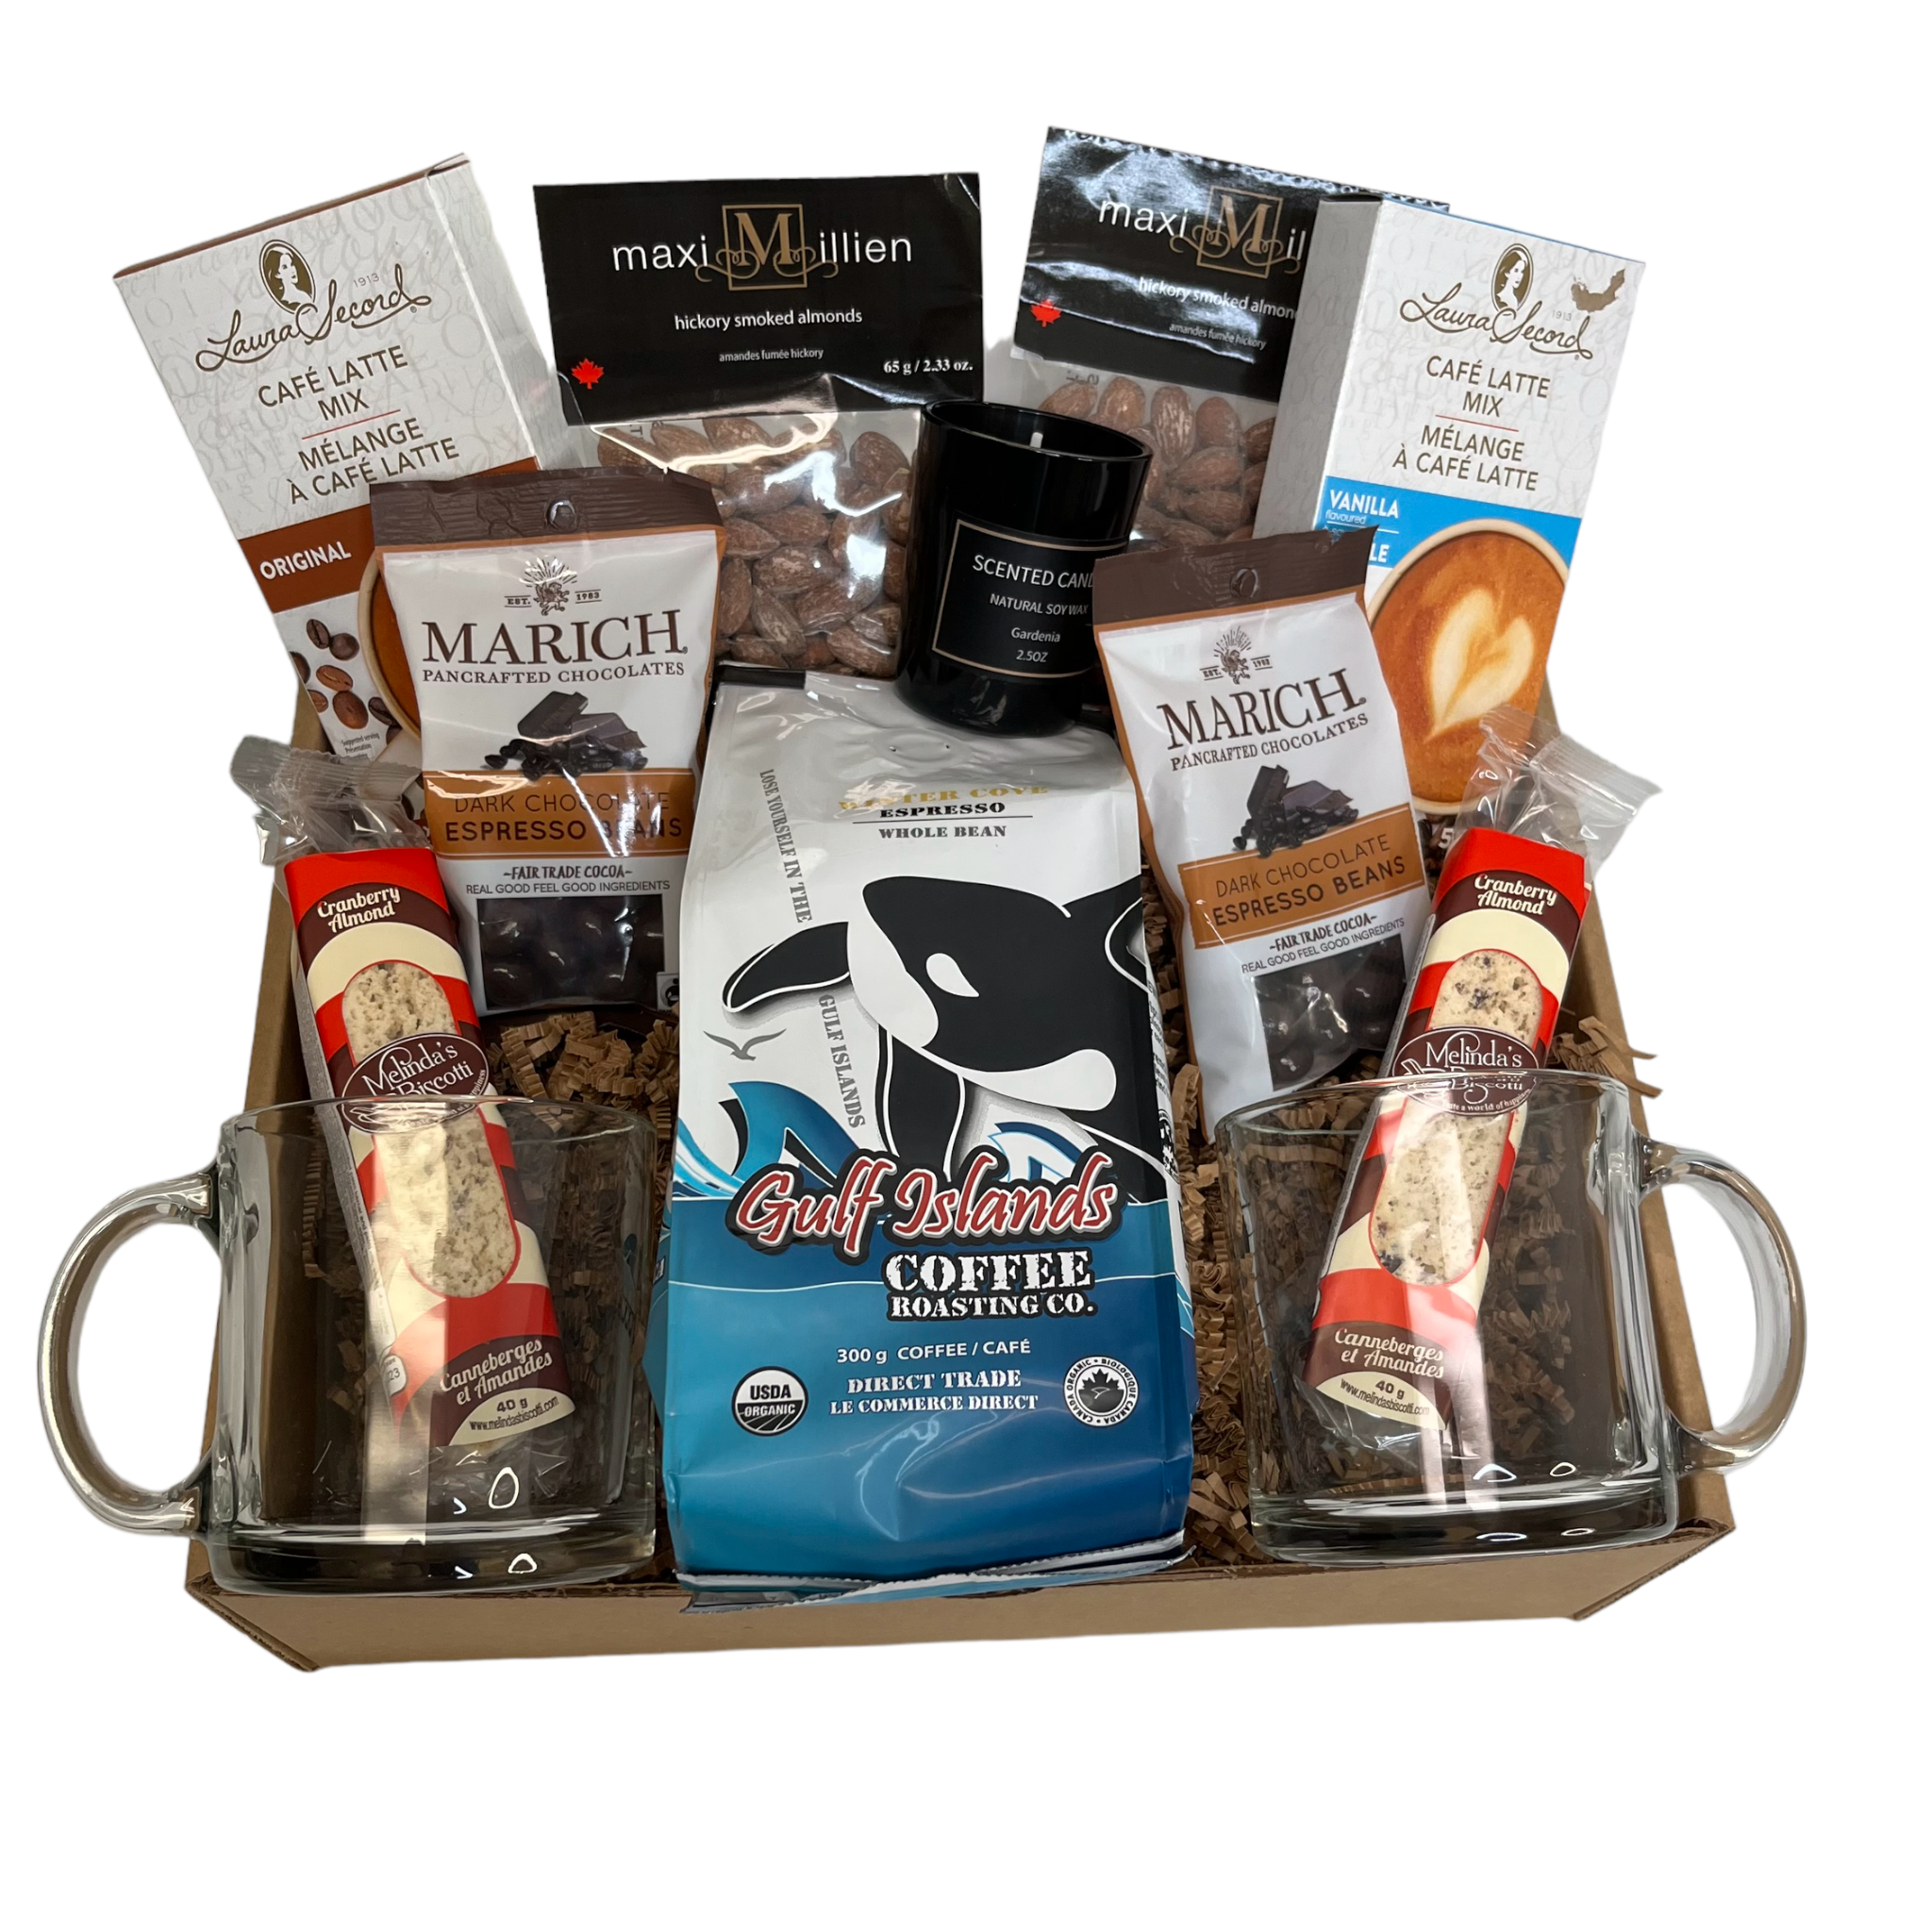 Take a Break and Savor the Moment with Our Coffee Time Gift Box